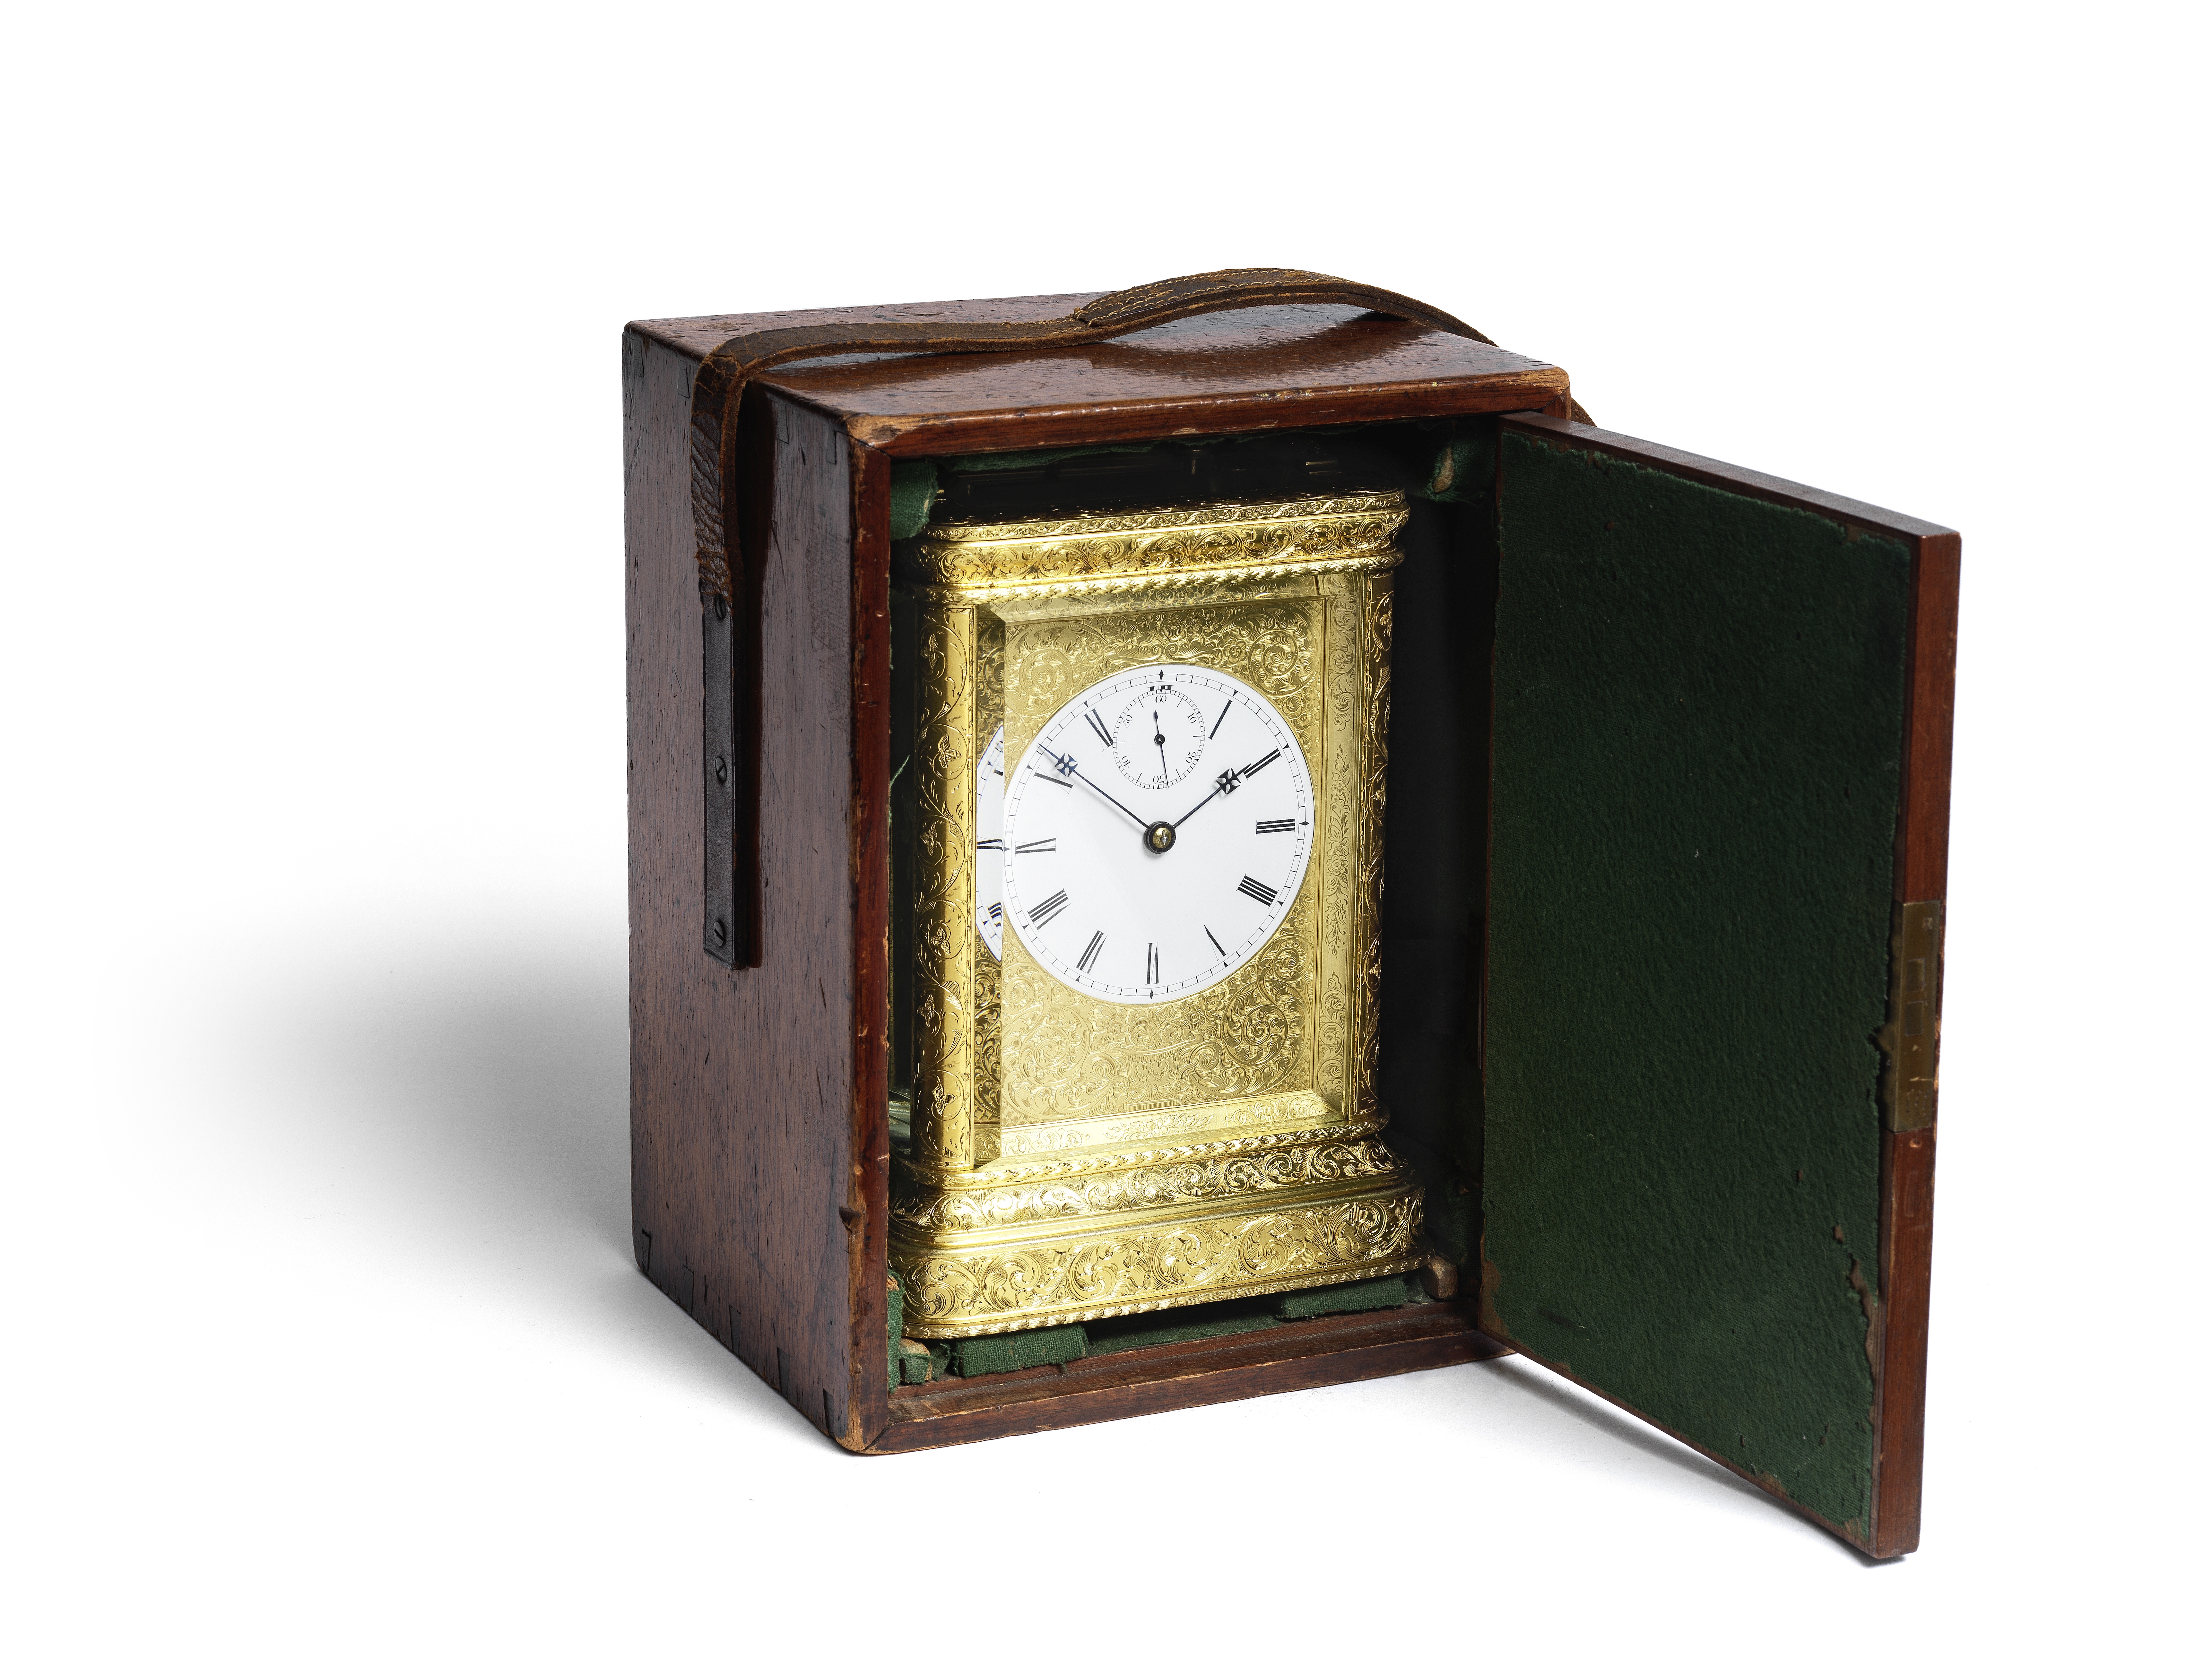 A very fine mid 19th Century English giant engraved brass carriage clock in the original baize-li...